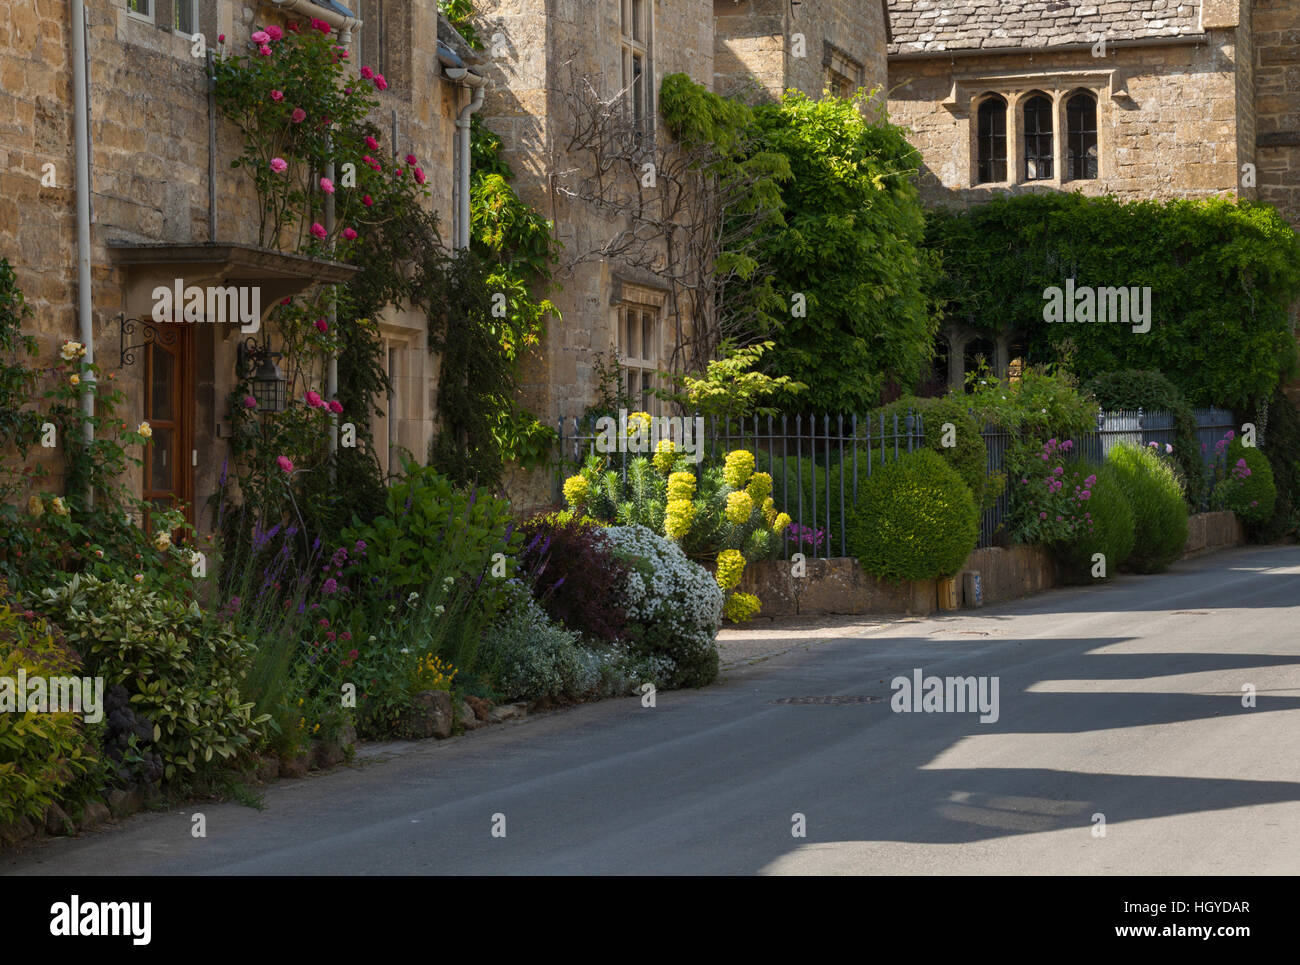 Cotswold stone cottages with colourful roadside floral borders in the village of Stanton, Cotswolds, Gloucestershire, England Stock Photo